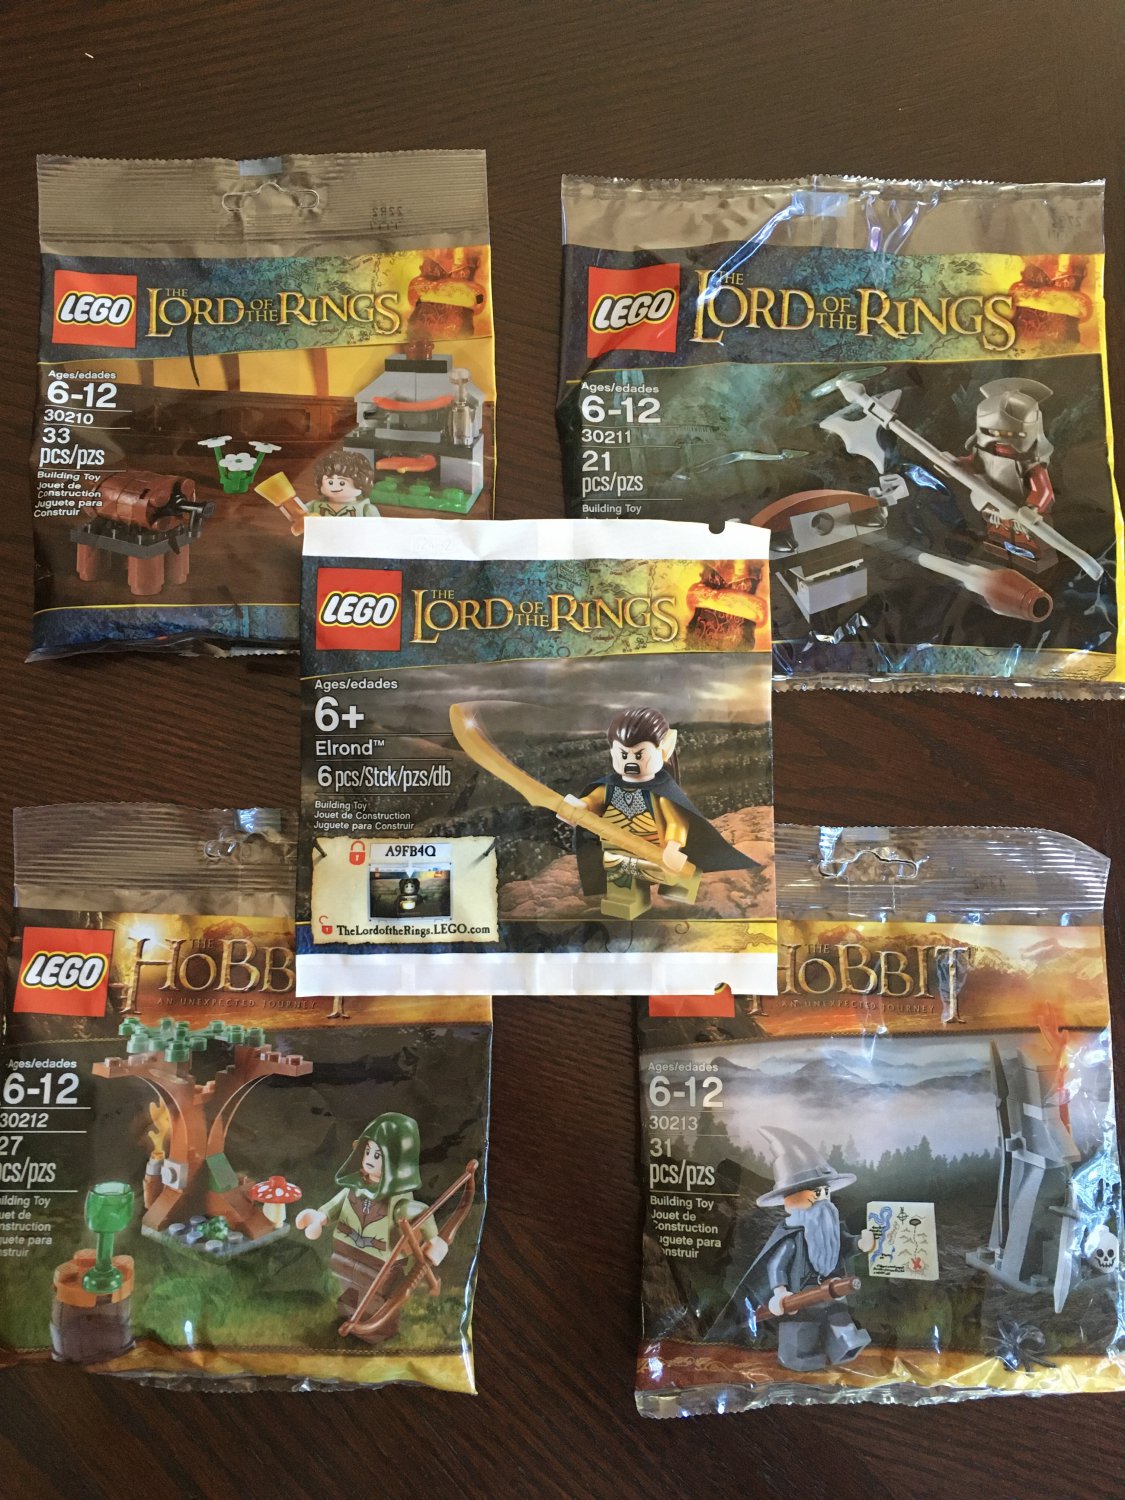 Lego Hobbit Fellowship Lord of the Rings 5000202 30210 30211 30212 30213 (2012) New! Sealed!